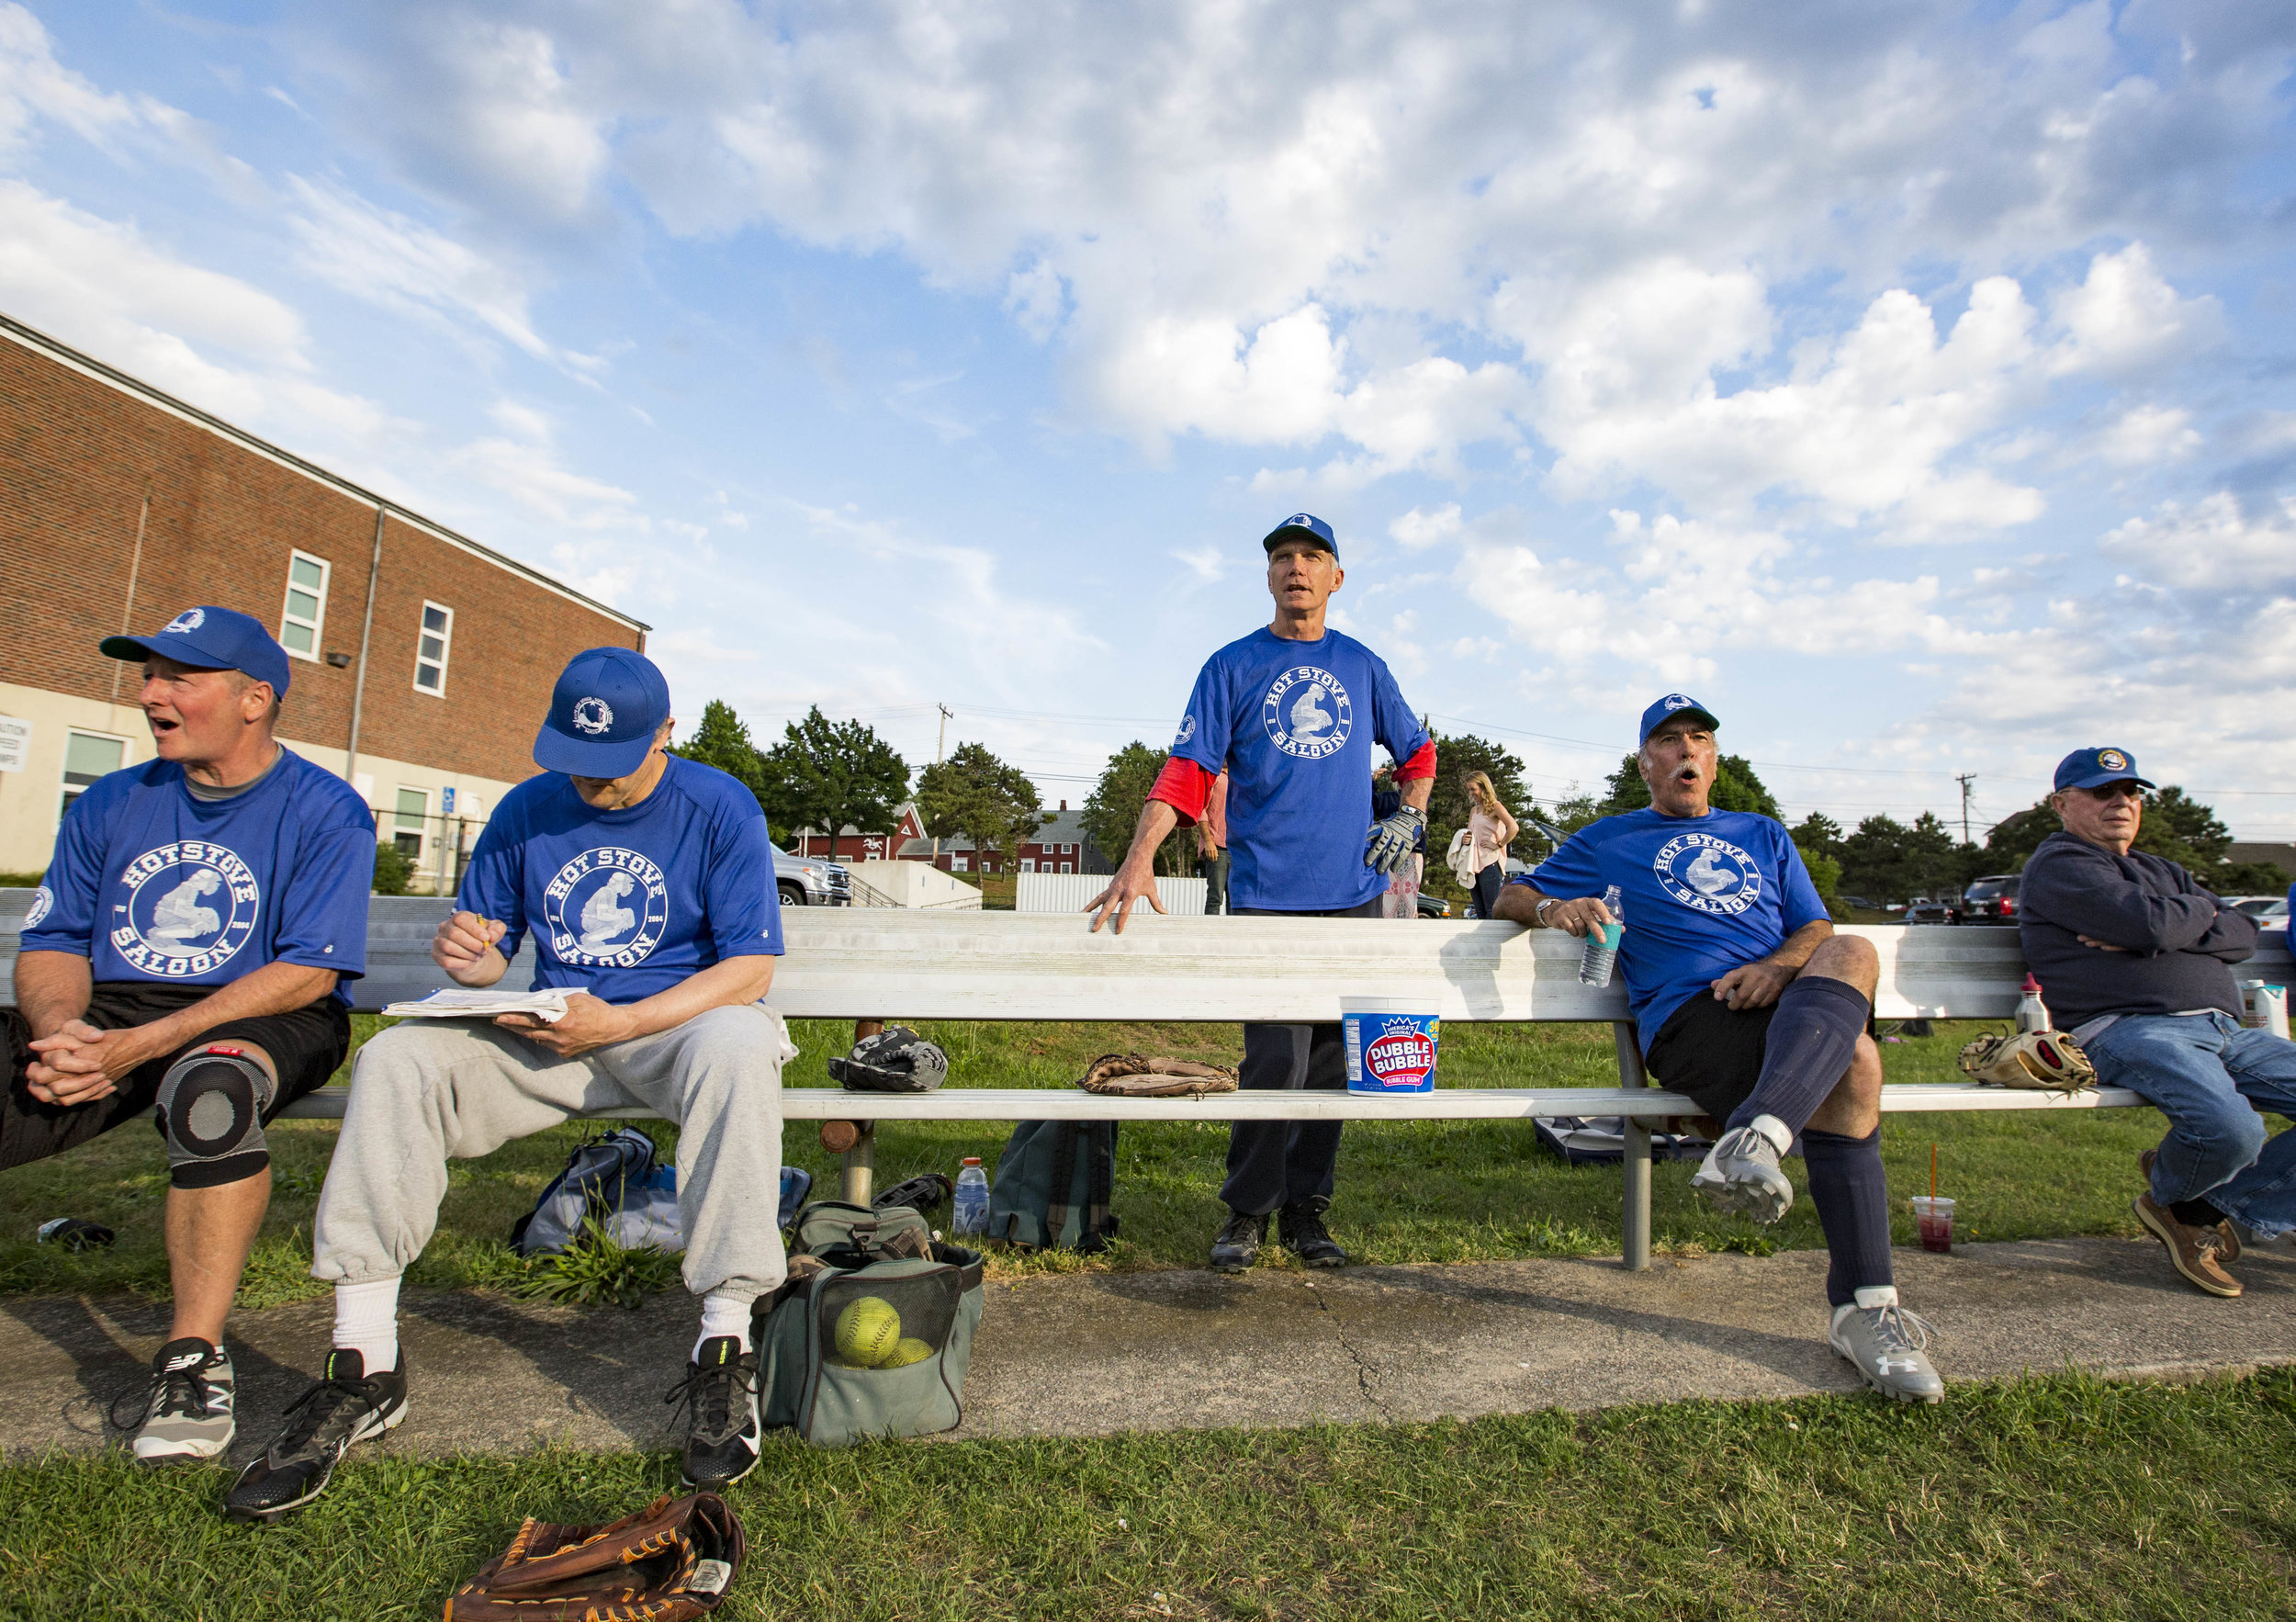  Stephen Akerman, center, watches his teammates of the Hot Stove Saloon from the bench during their game against the Mid-Cape Door on June 27, 2017. Akerman is the youngest player in the league at 56. 